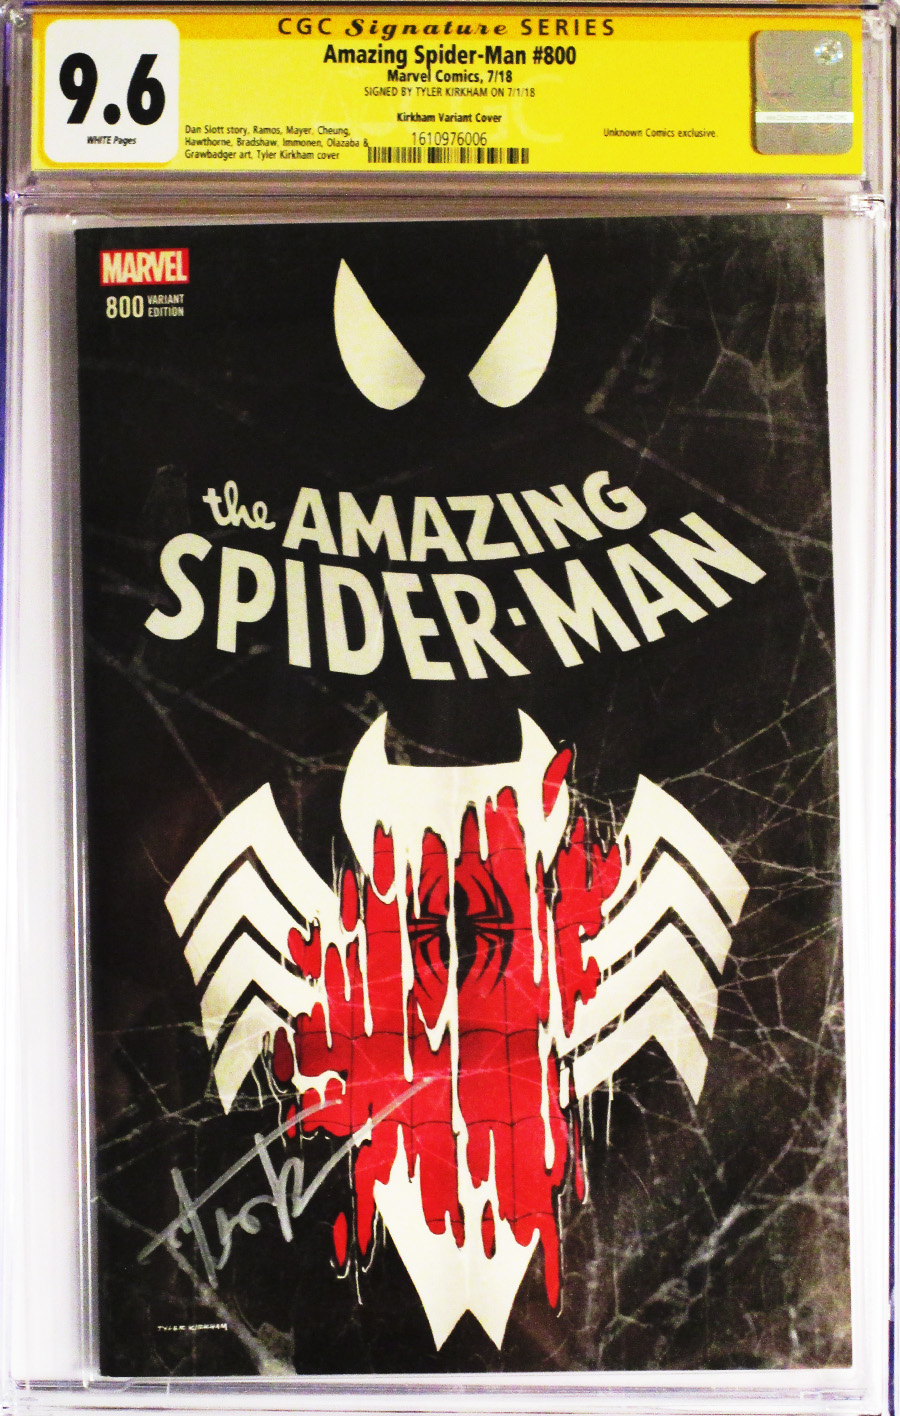 Amazing Spider-Man Vol 4 #800 Cover Z-J CGC SS 9.6 Signed By Tyler Kirkham Unkown Comics Exclusive Variant Cover